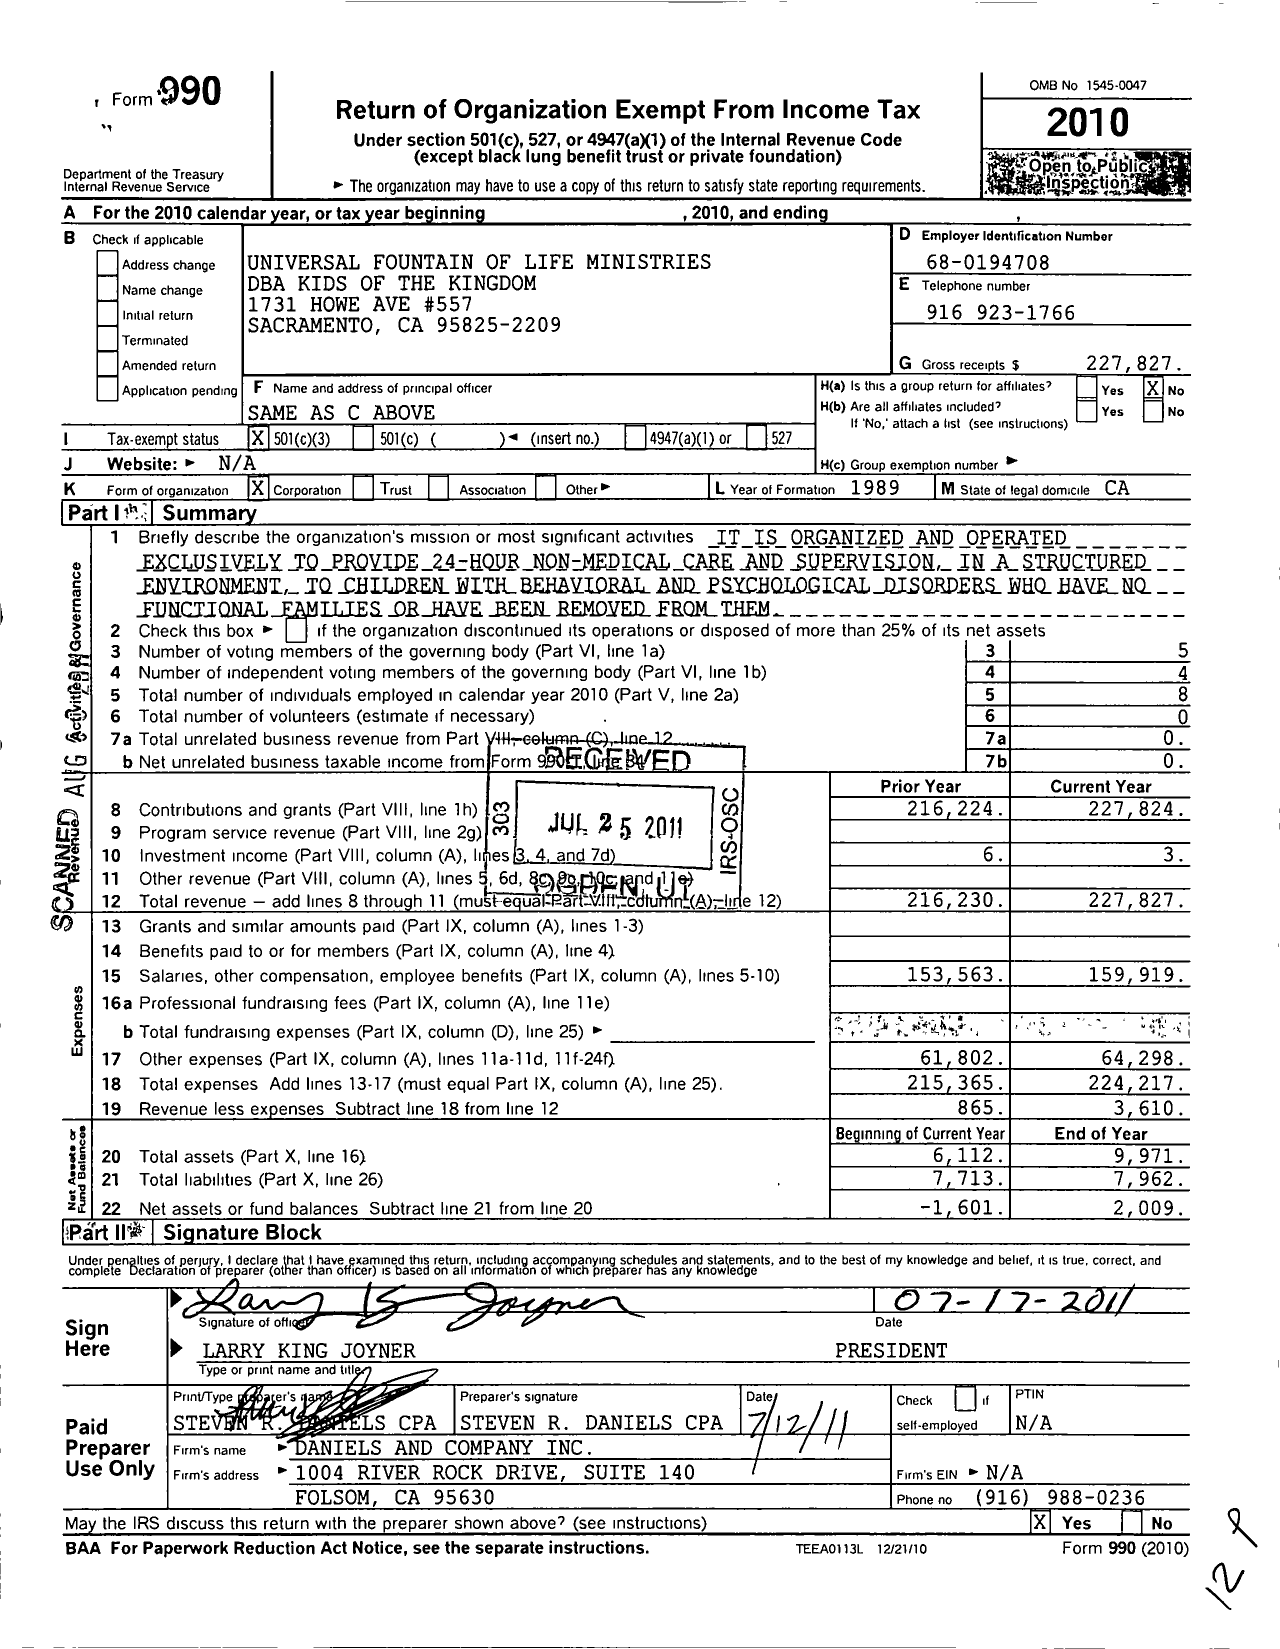 Image of first page of 2010 Form 990 for Universal Fountain of Life Ministries